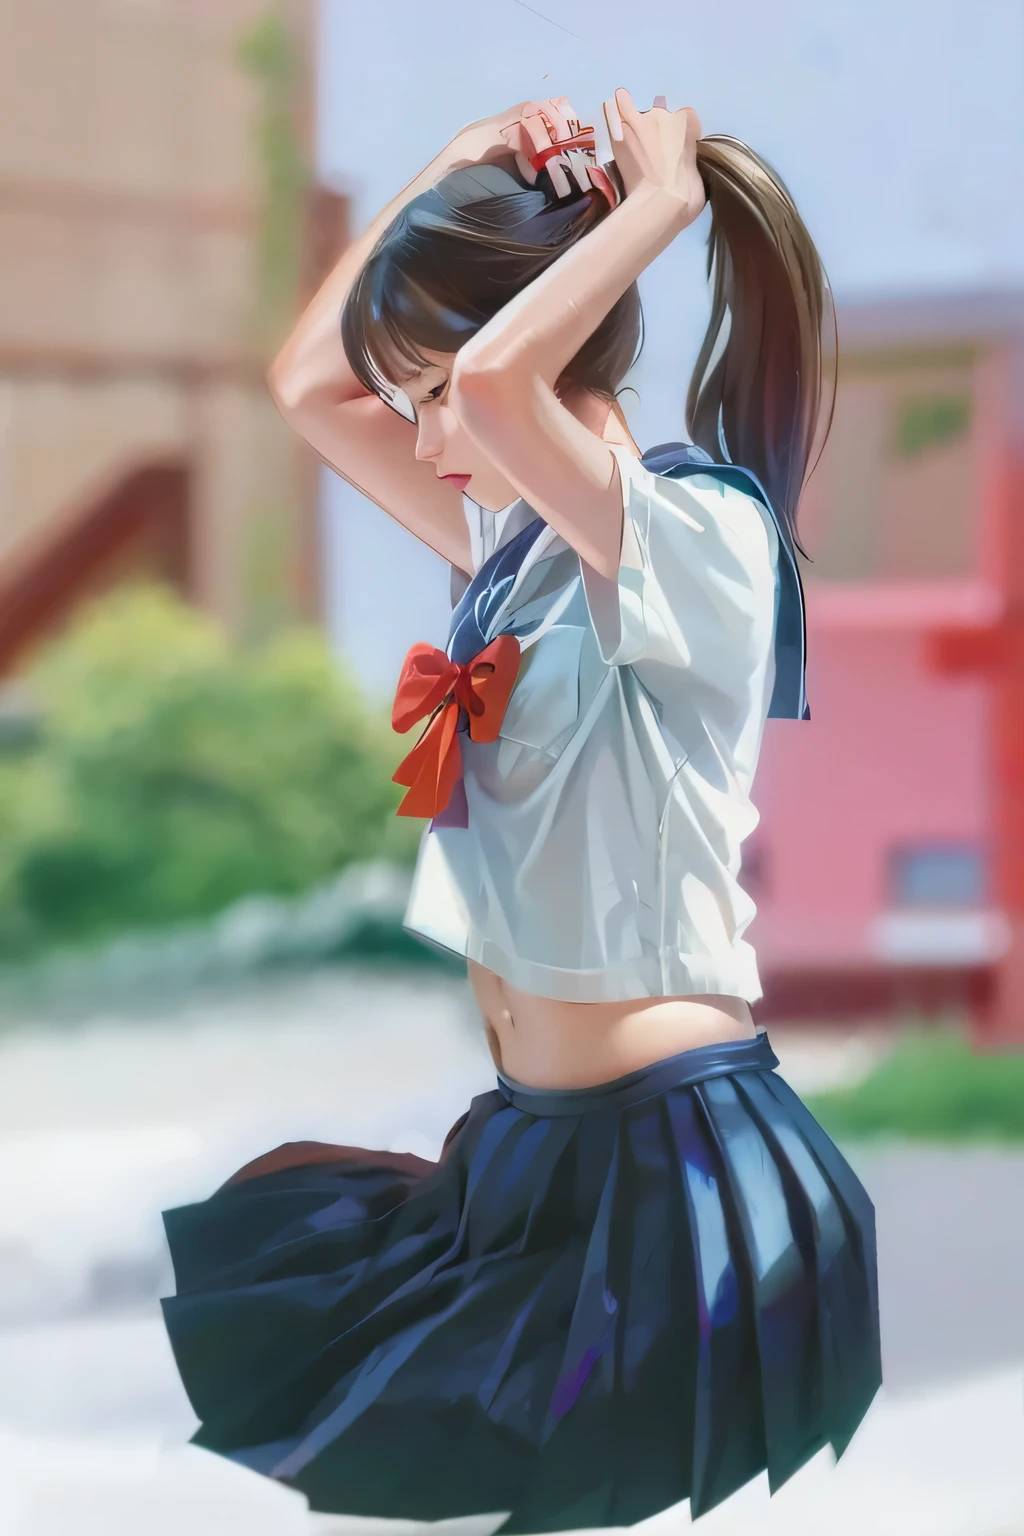 Anime girl wearing skirt and white shirt with red bow, Painting in animation artist studio, Produced by Anime Painter Studio, Smooth anime CG art, Anime realistic style, Xin Haicheng. digital rendering, Xin Haicheng style, Realistic anime art style, Xin Haicheng art style, Authentic anime style from pixiv, surreal 